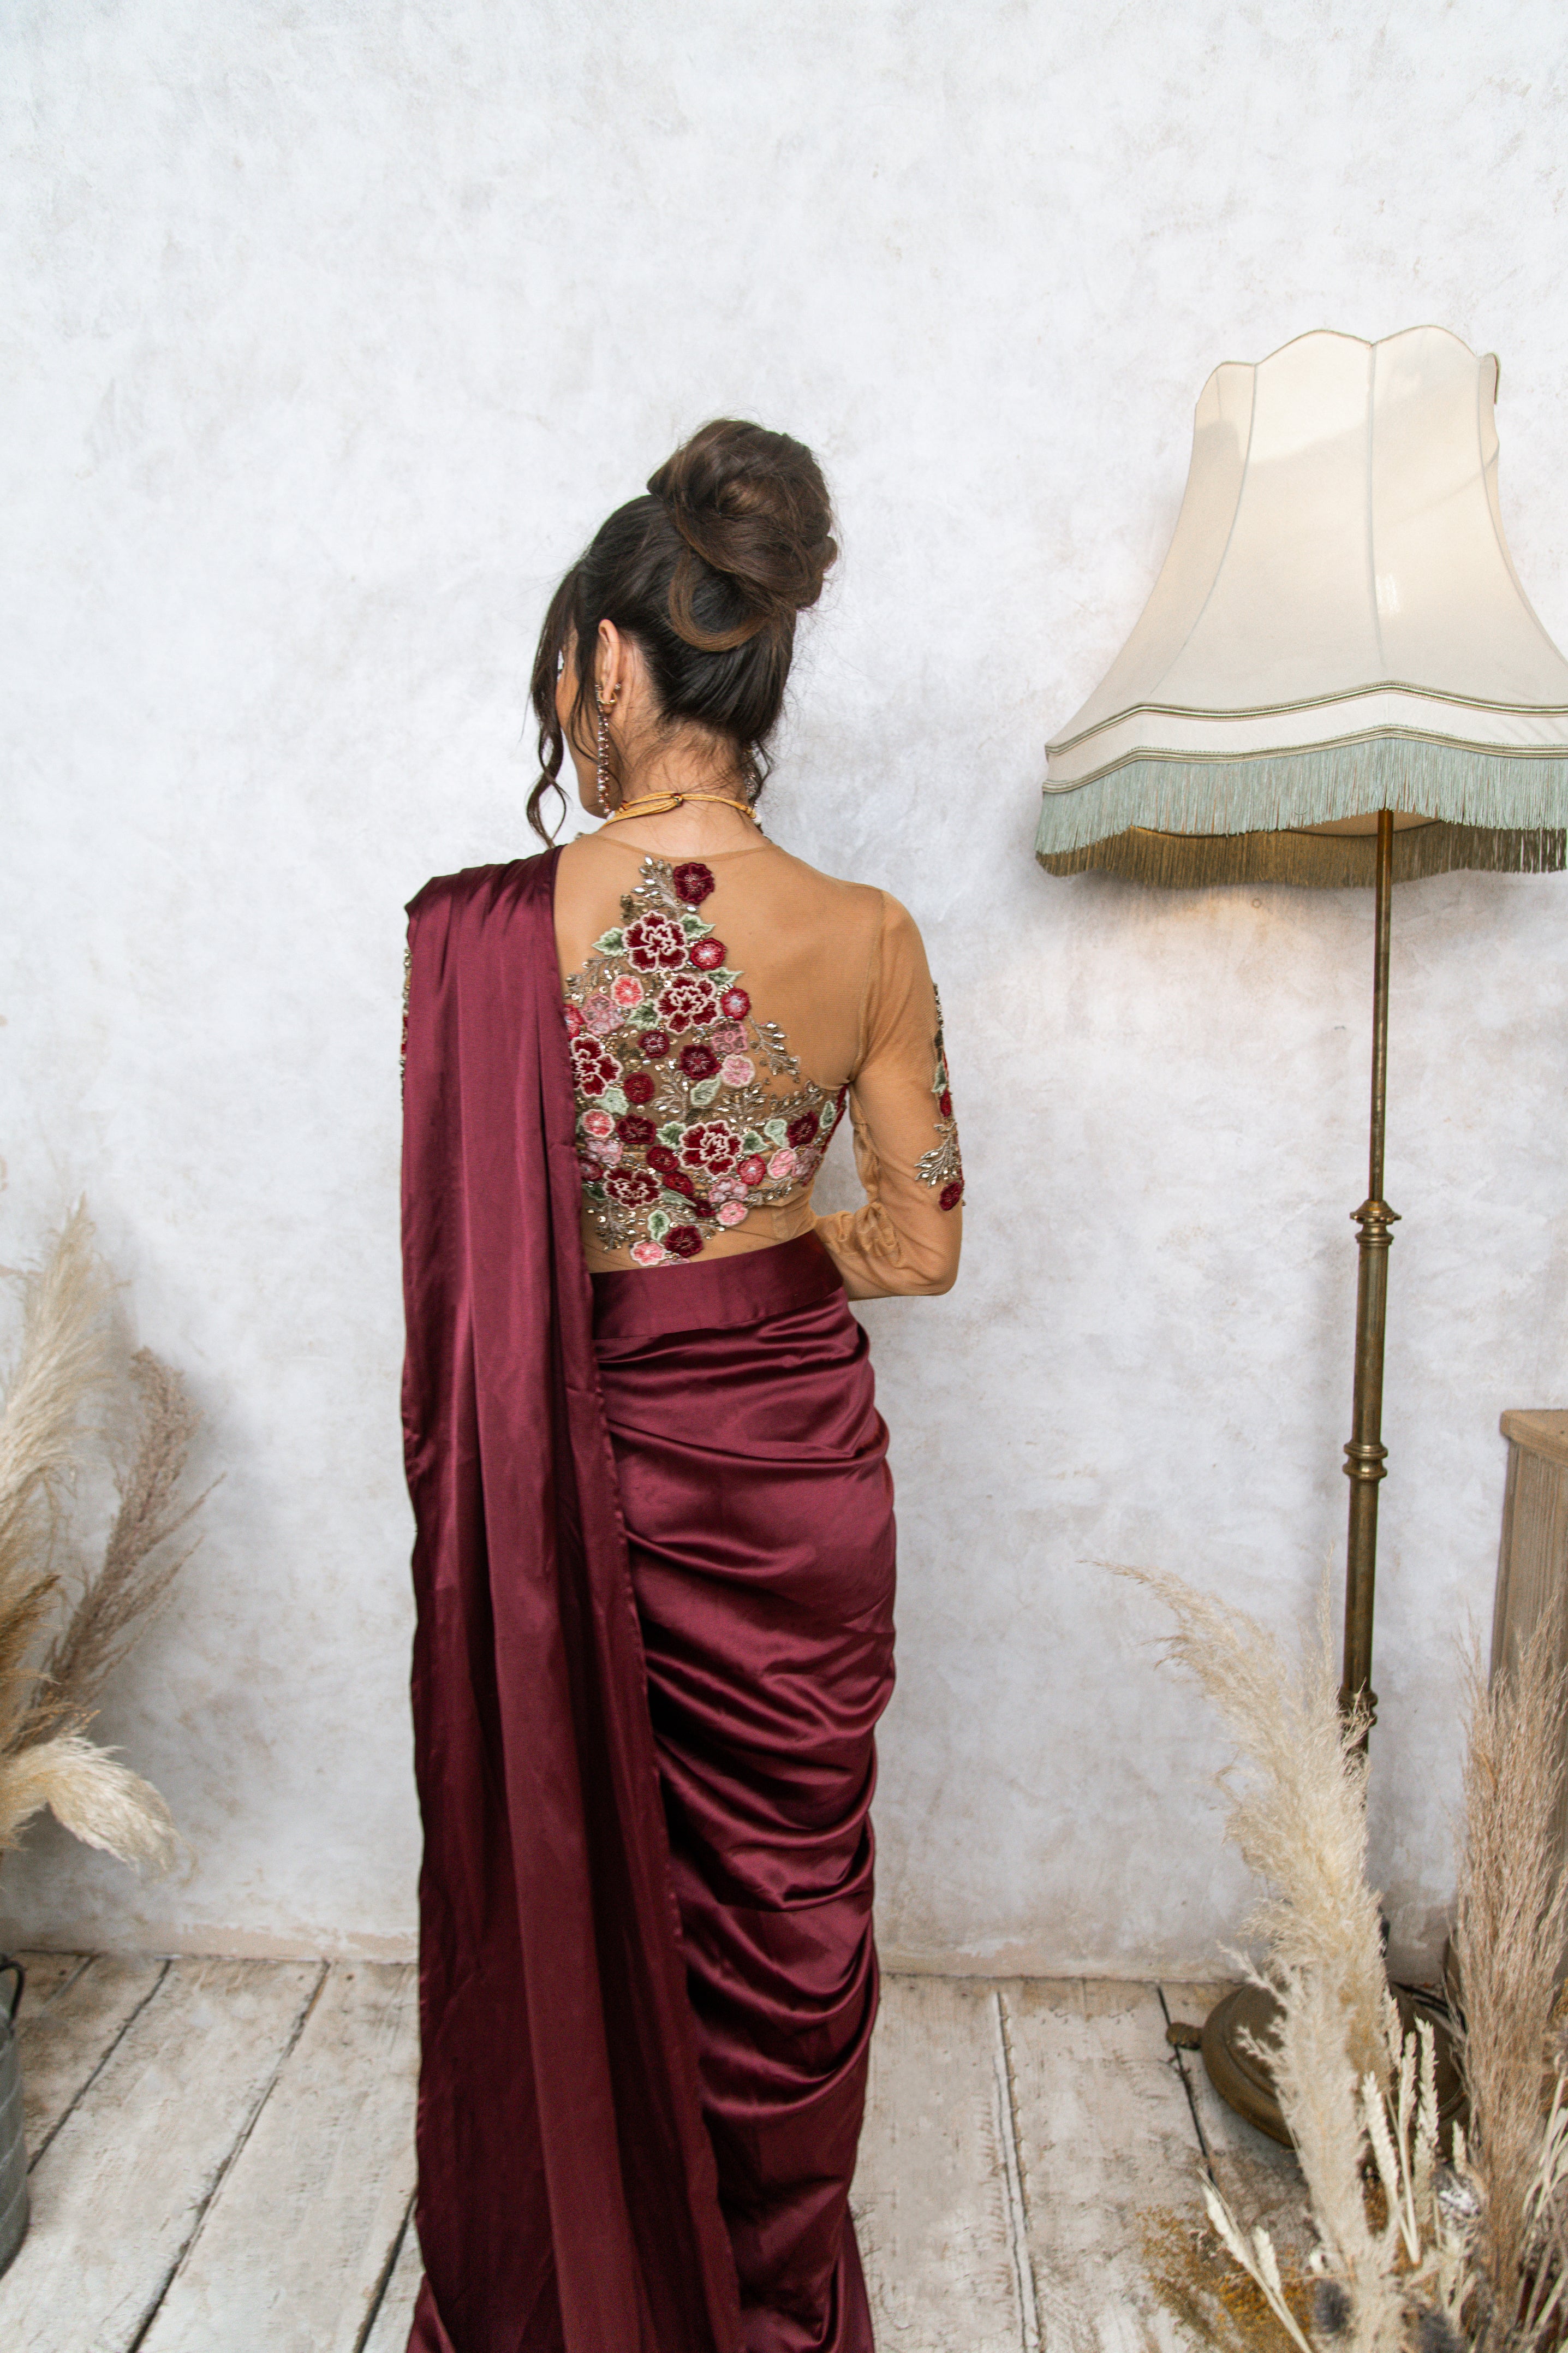 The Floral Tulle Top & Draped Saree Skirt in Wine